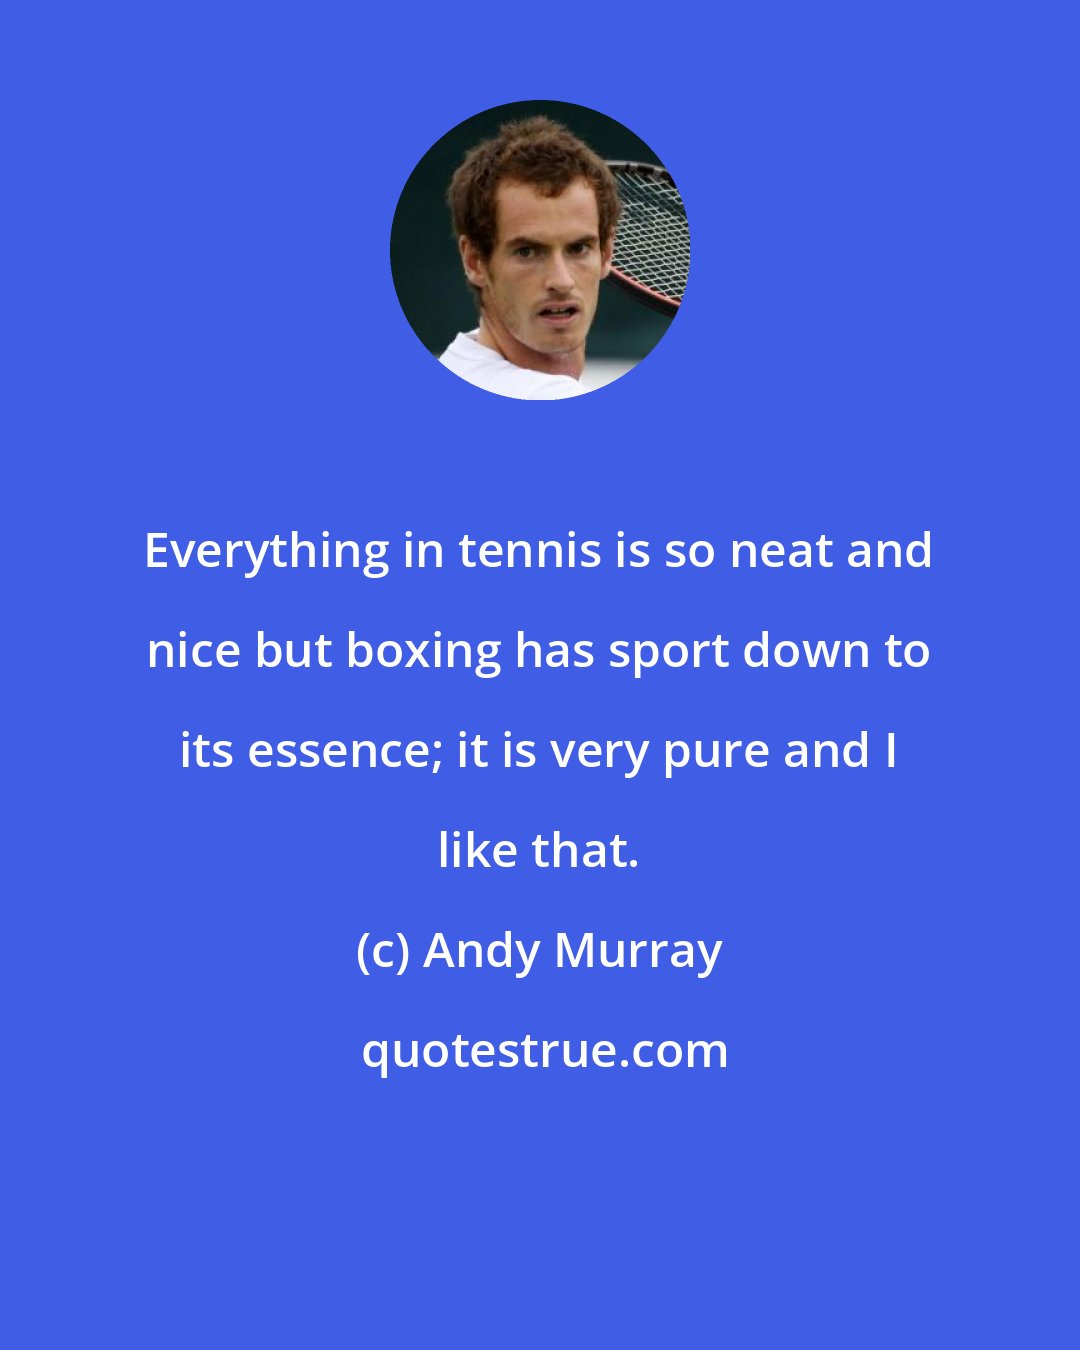 Andy Murray: Everything in tennis is so neat and nice but boxing has sport down to its essence; it is very pure and I like that.